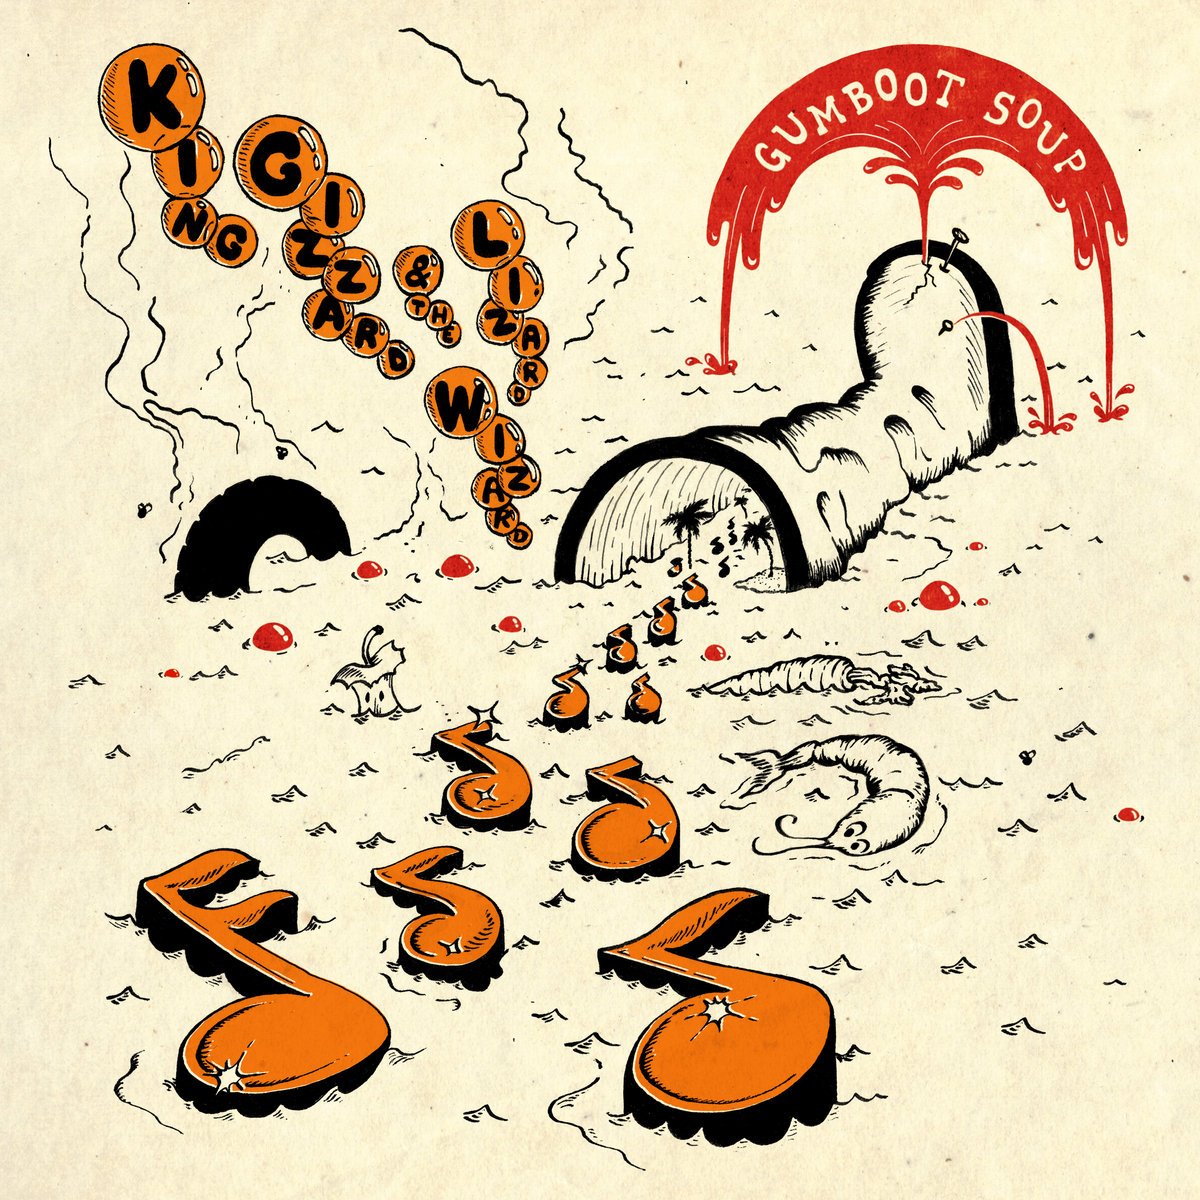 Gumboot Soup (Orange with red and black splatter)